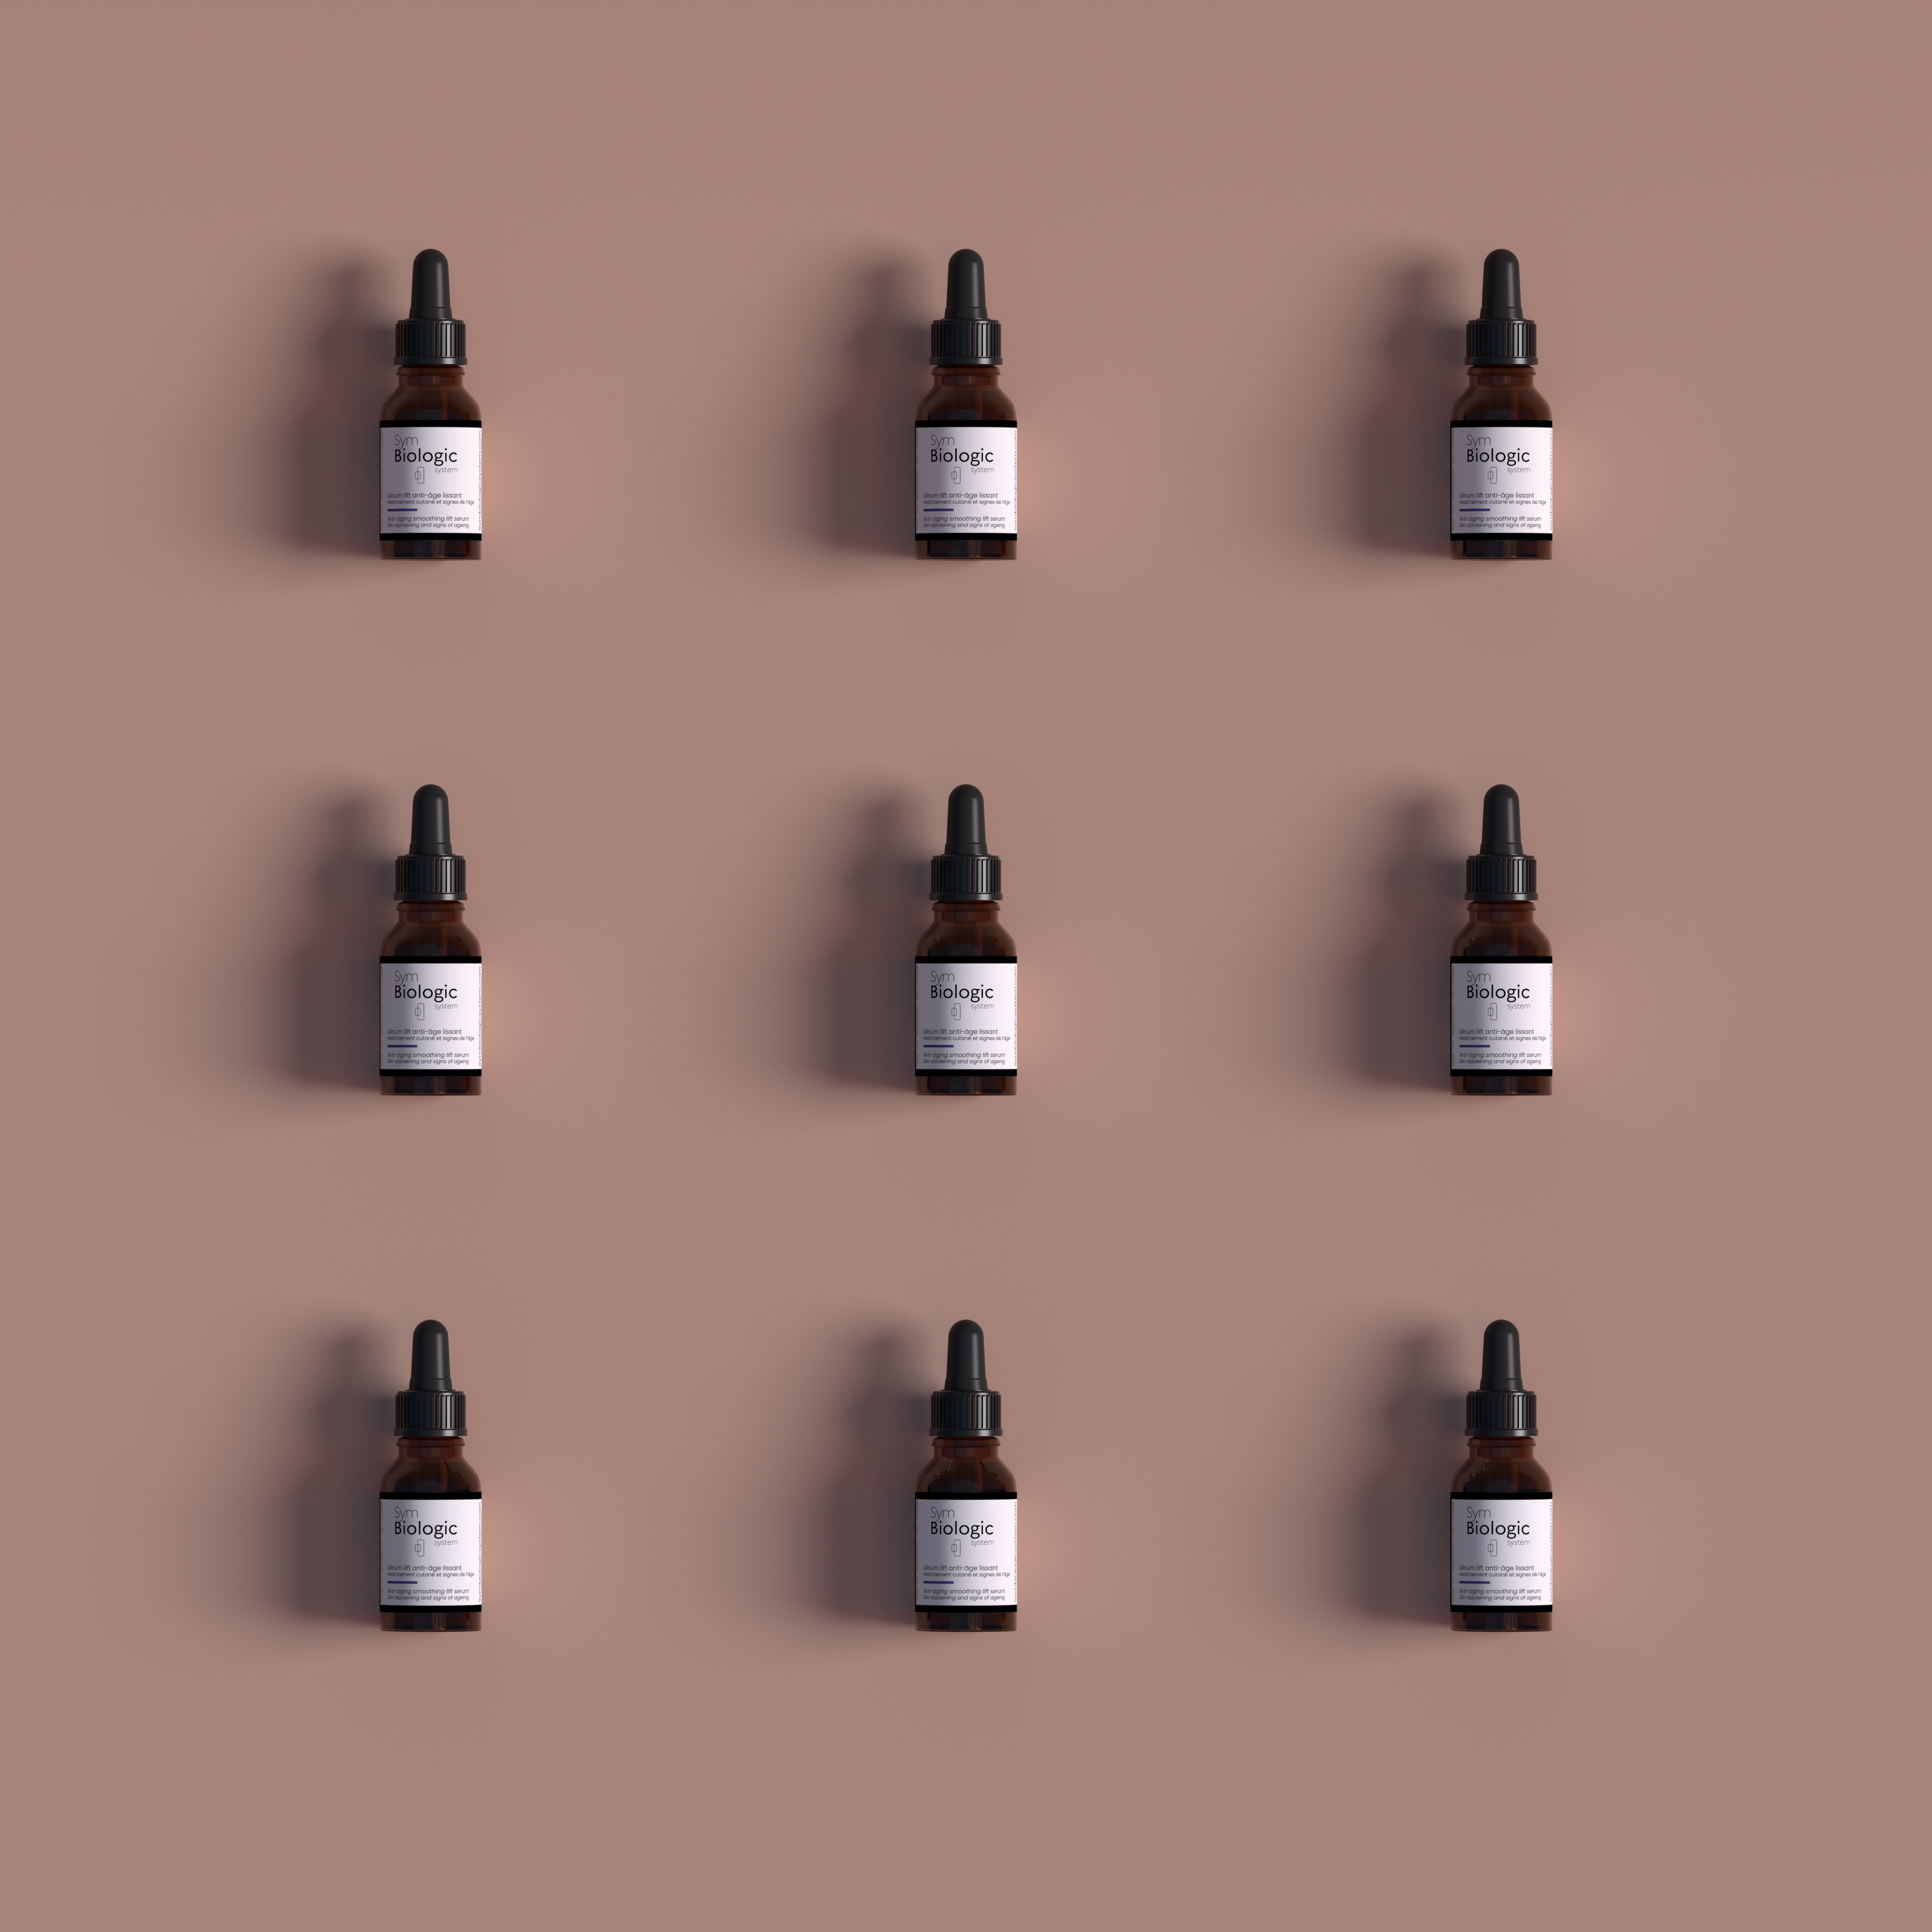 Image of nine Anti-Aging Smoothing Lift Serum bottles displayed in a 3x3 square grid from the front, against a light red backdrop, highlighting the product&